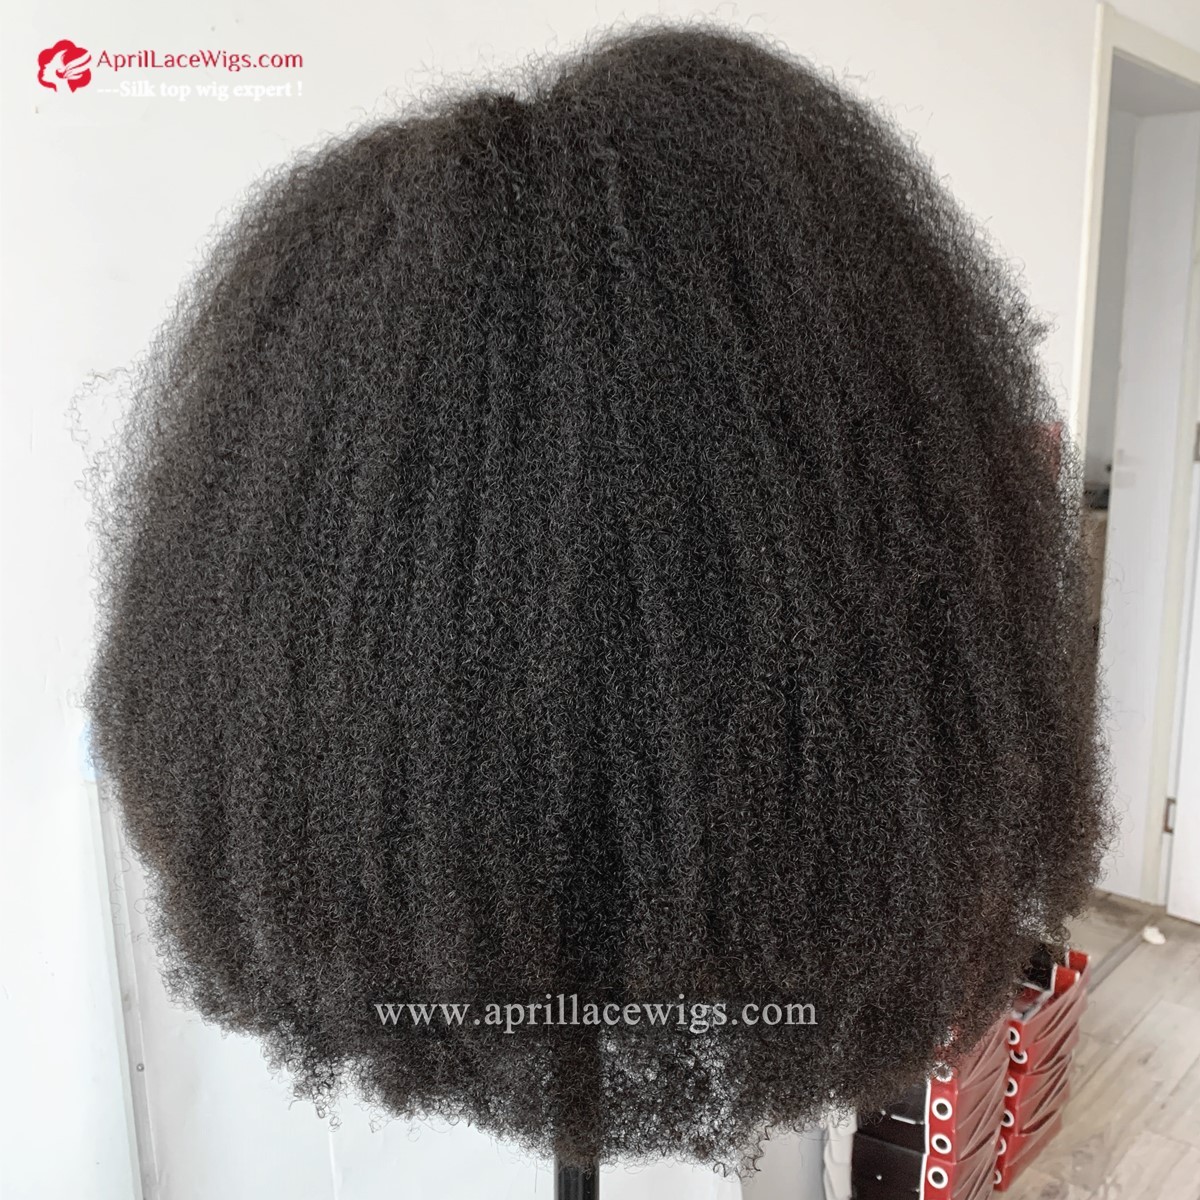 Virgin human hair 4a curly glueless 360 wig with 4c baby hairs Afro curly mimic african american hairs